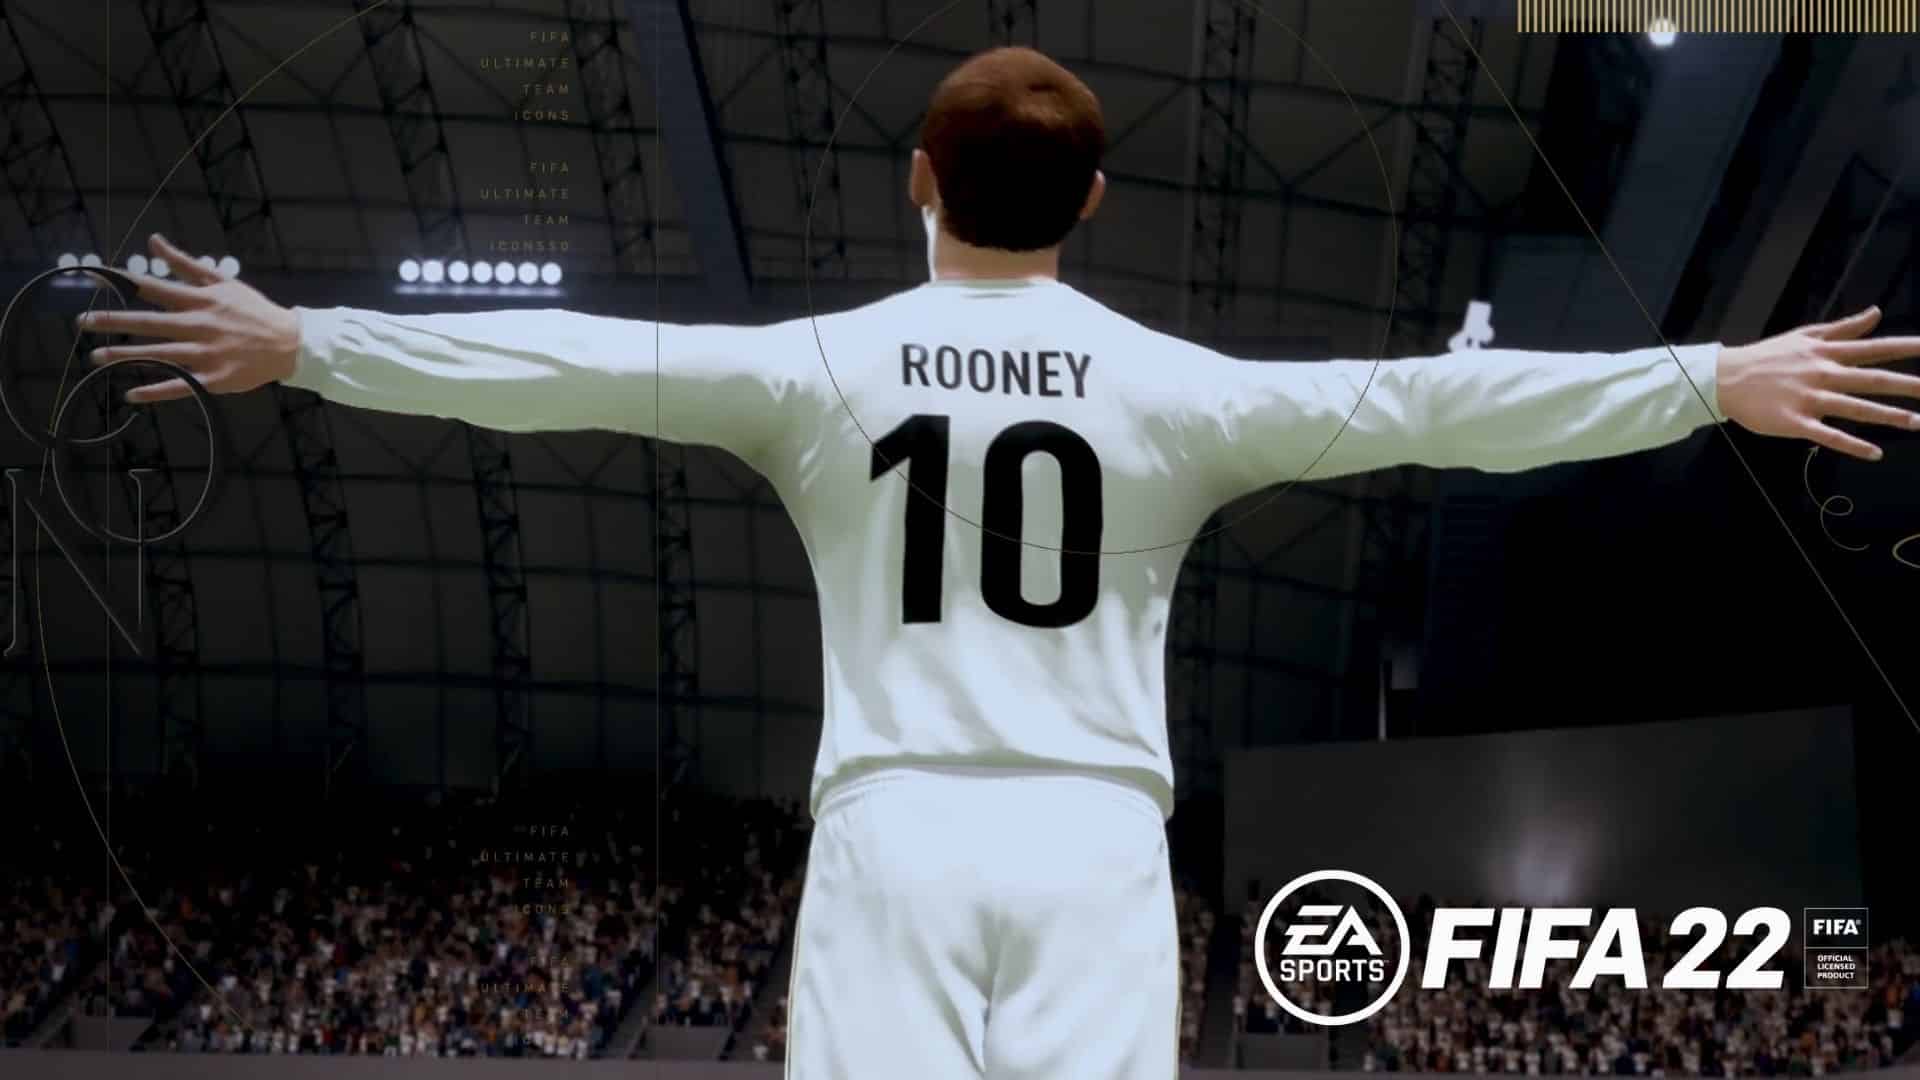 rooney icon card celebrating in fifa 22 ultimate team